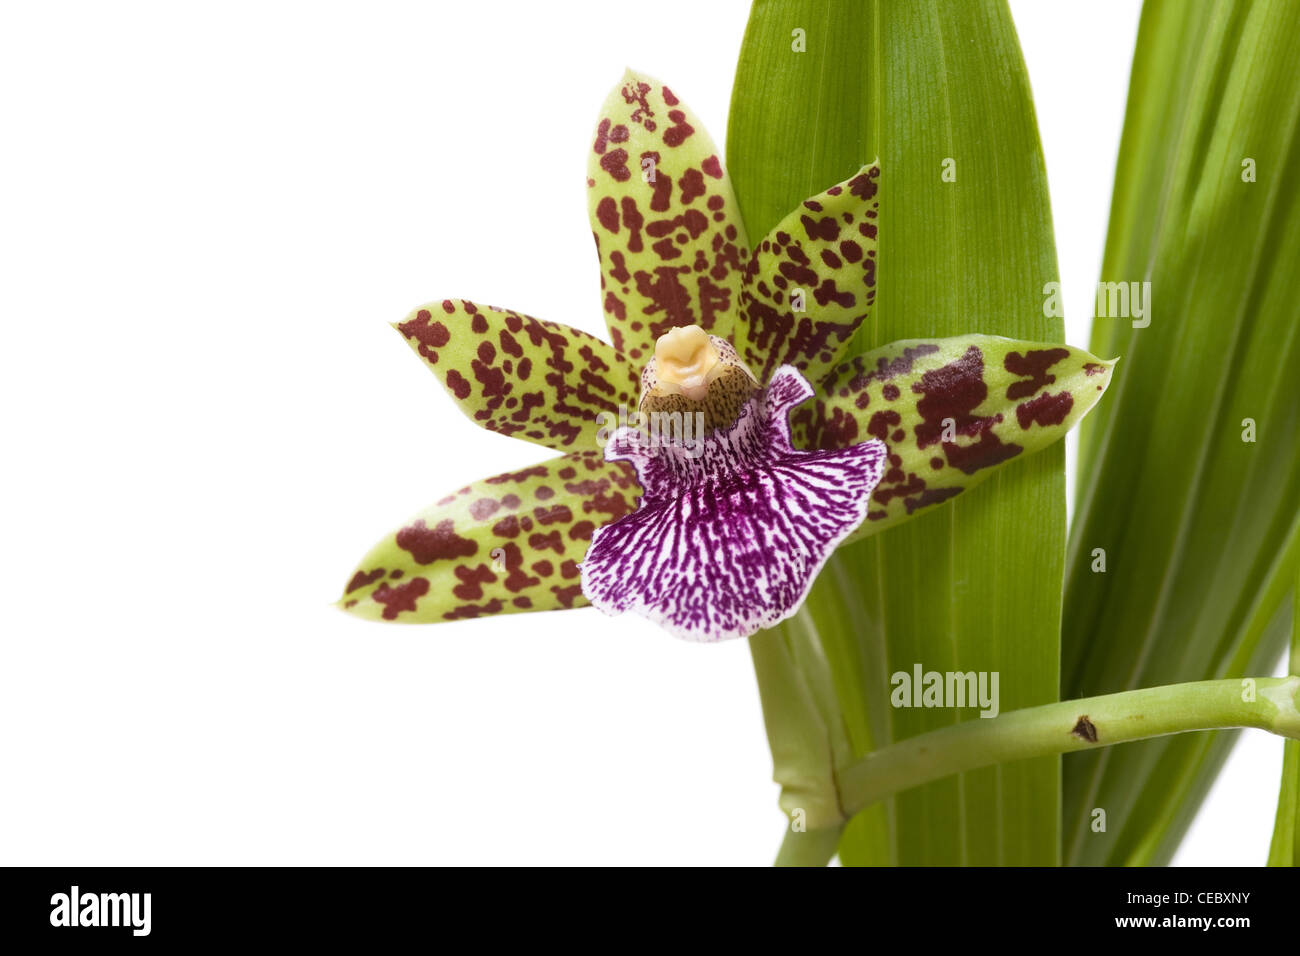 Blooming orchid with cute tiger-striped flowers. Stock Photo